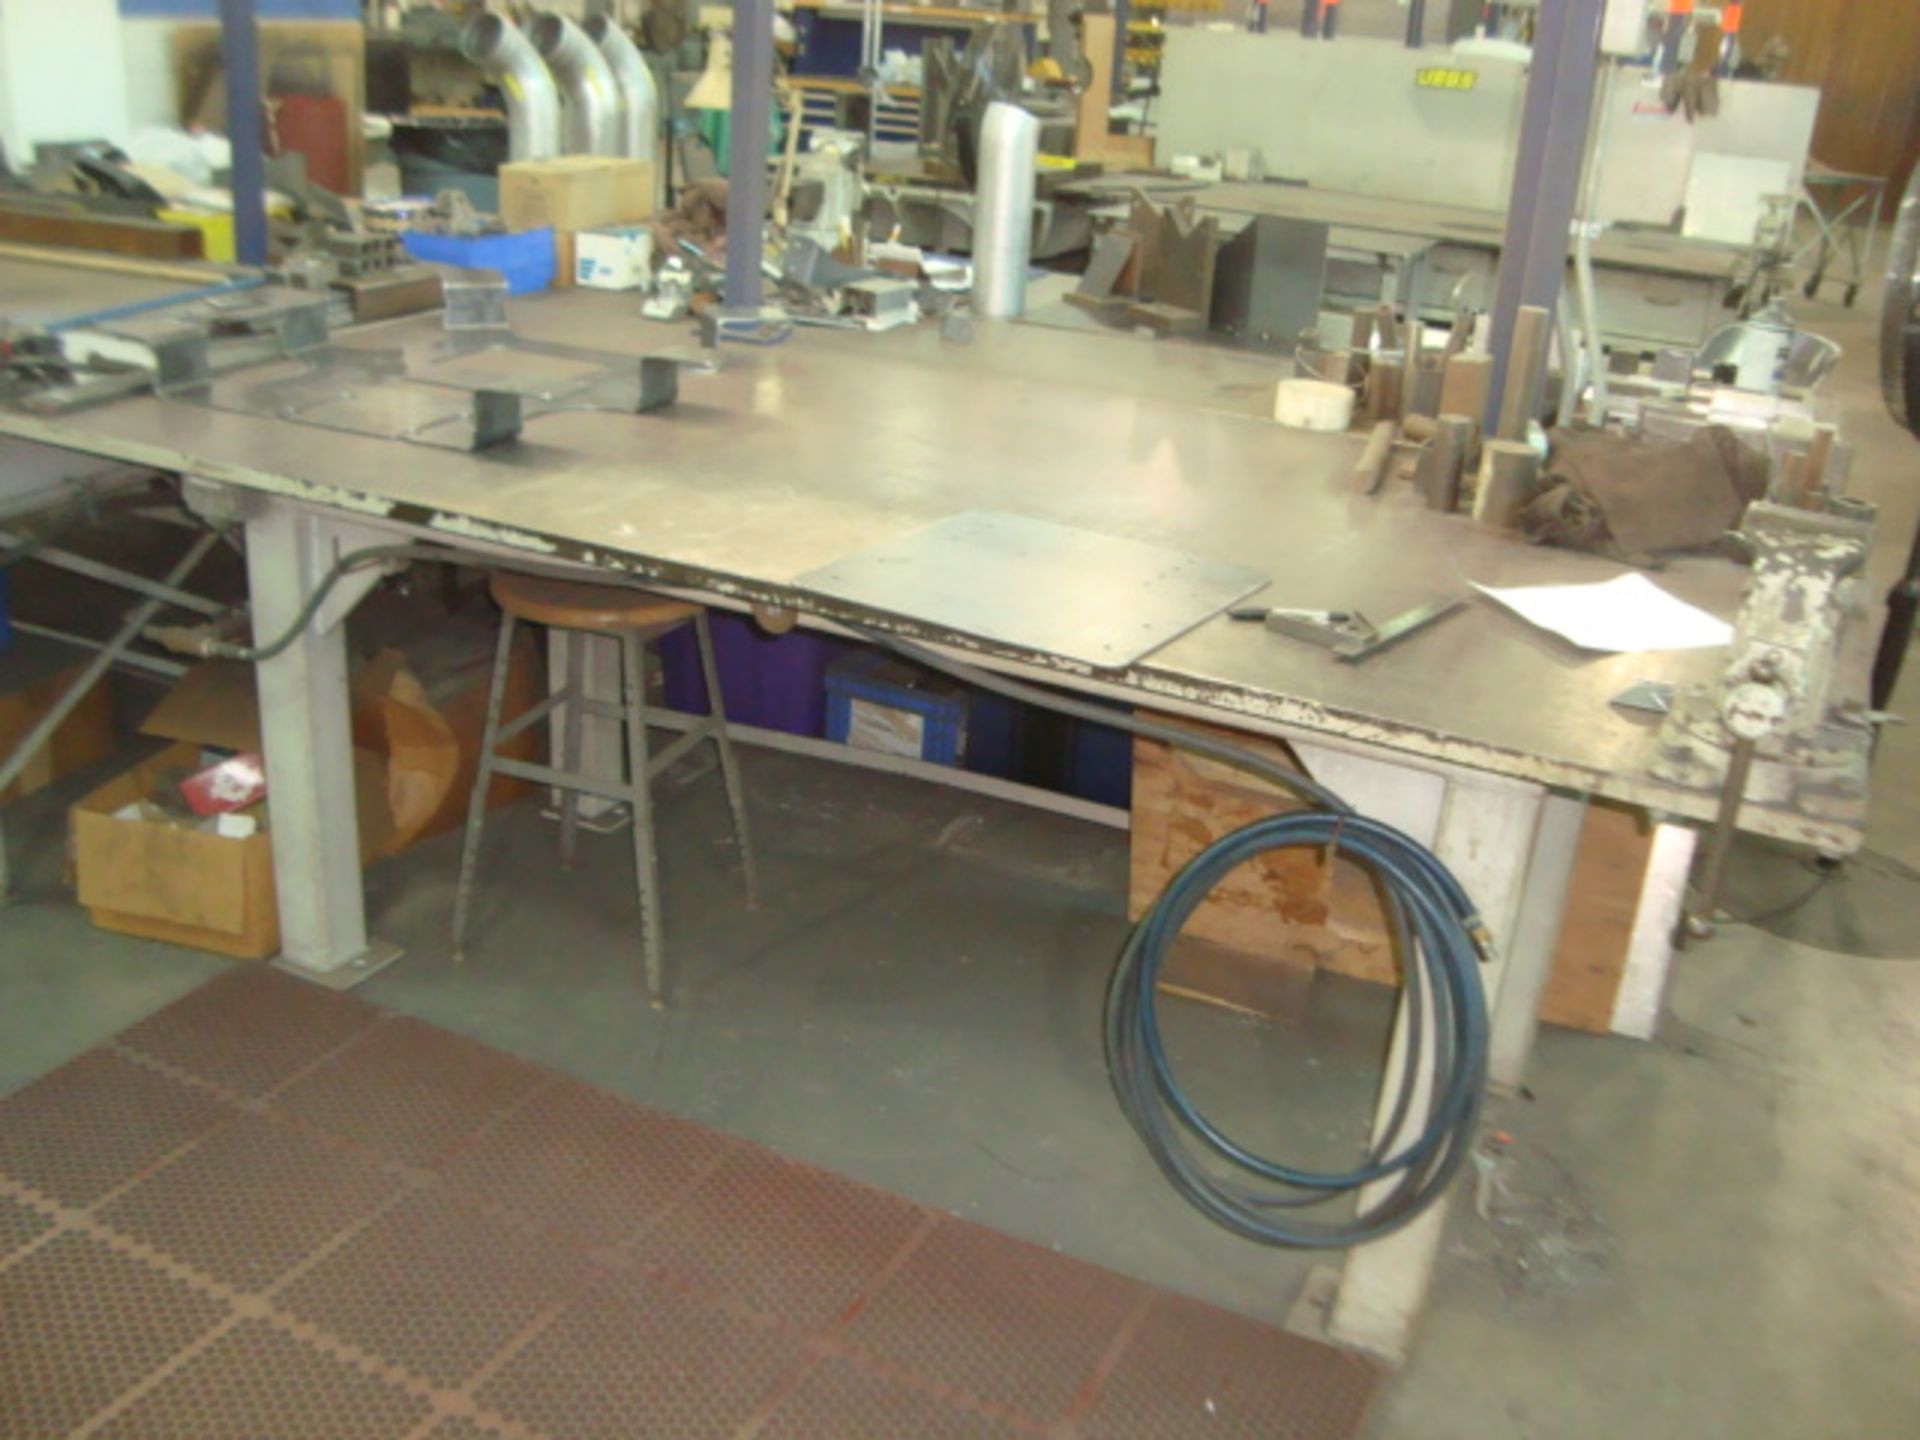 Heavy Duty Steel Work Table/ Bench With Heavy Duty 4" in. Bench Vise & Overhead Fluorescent - Image 2 of 3